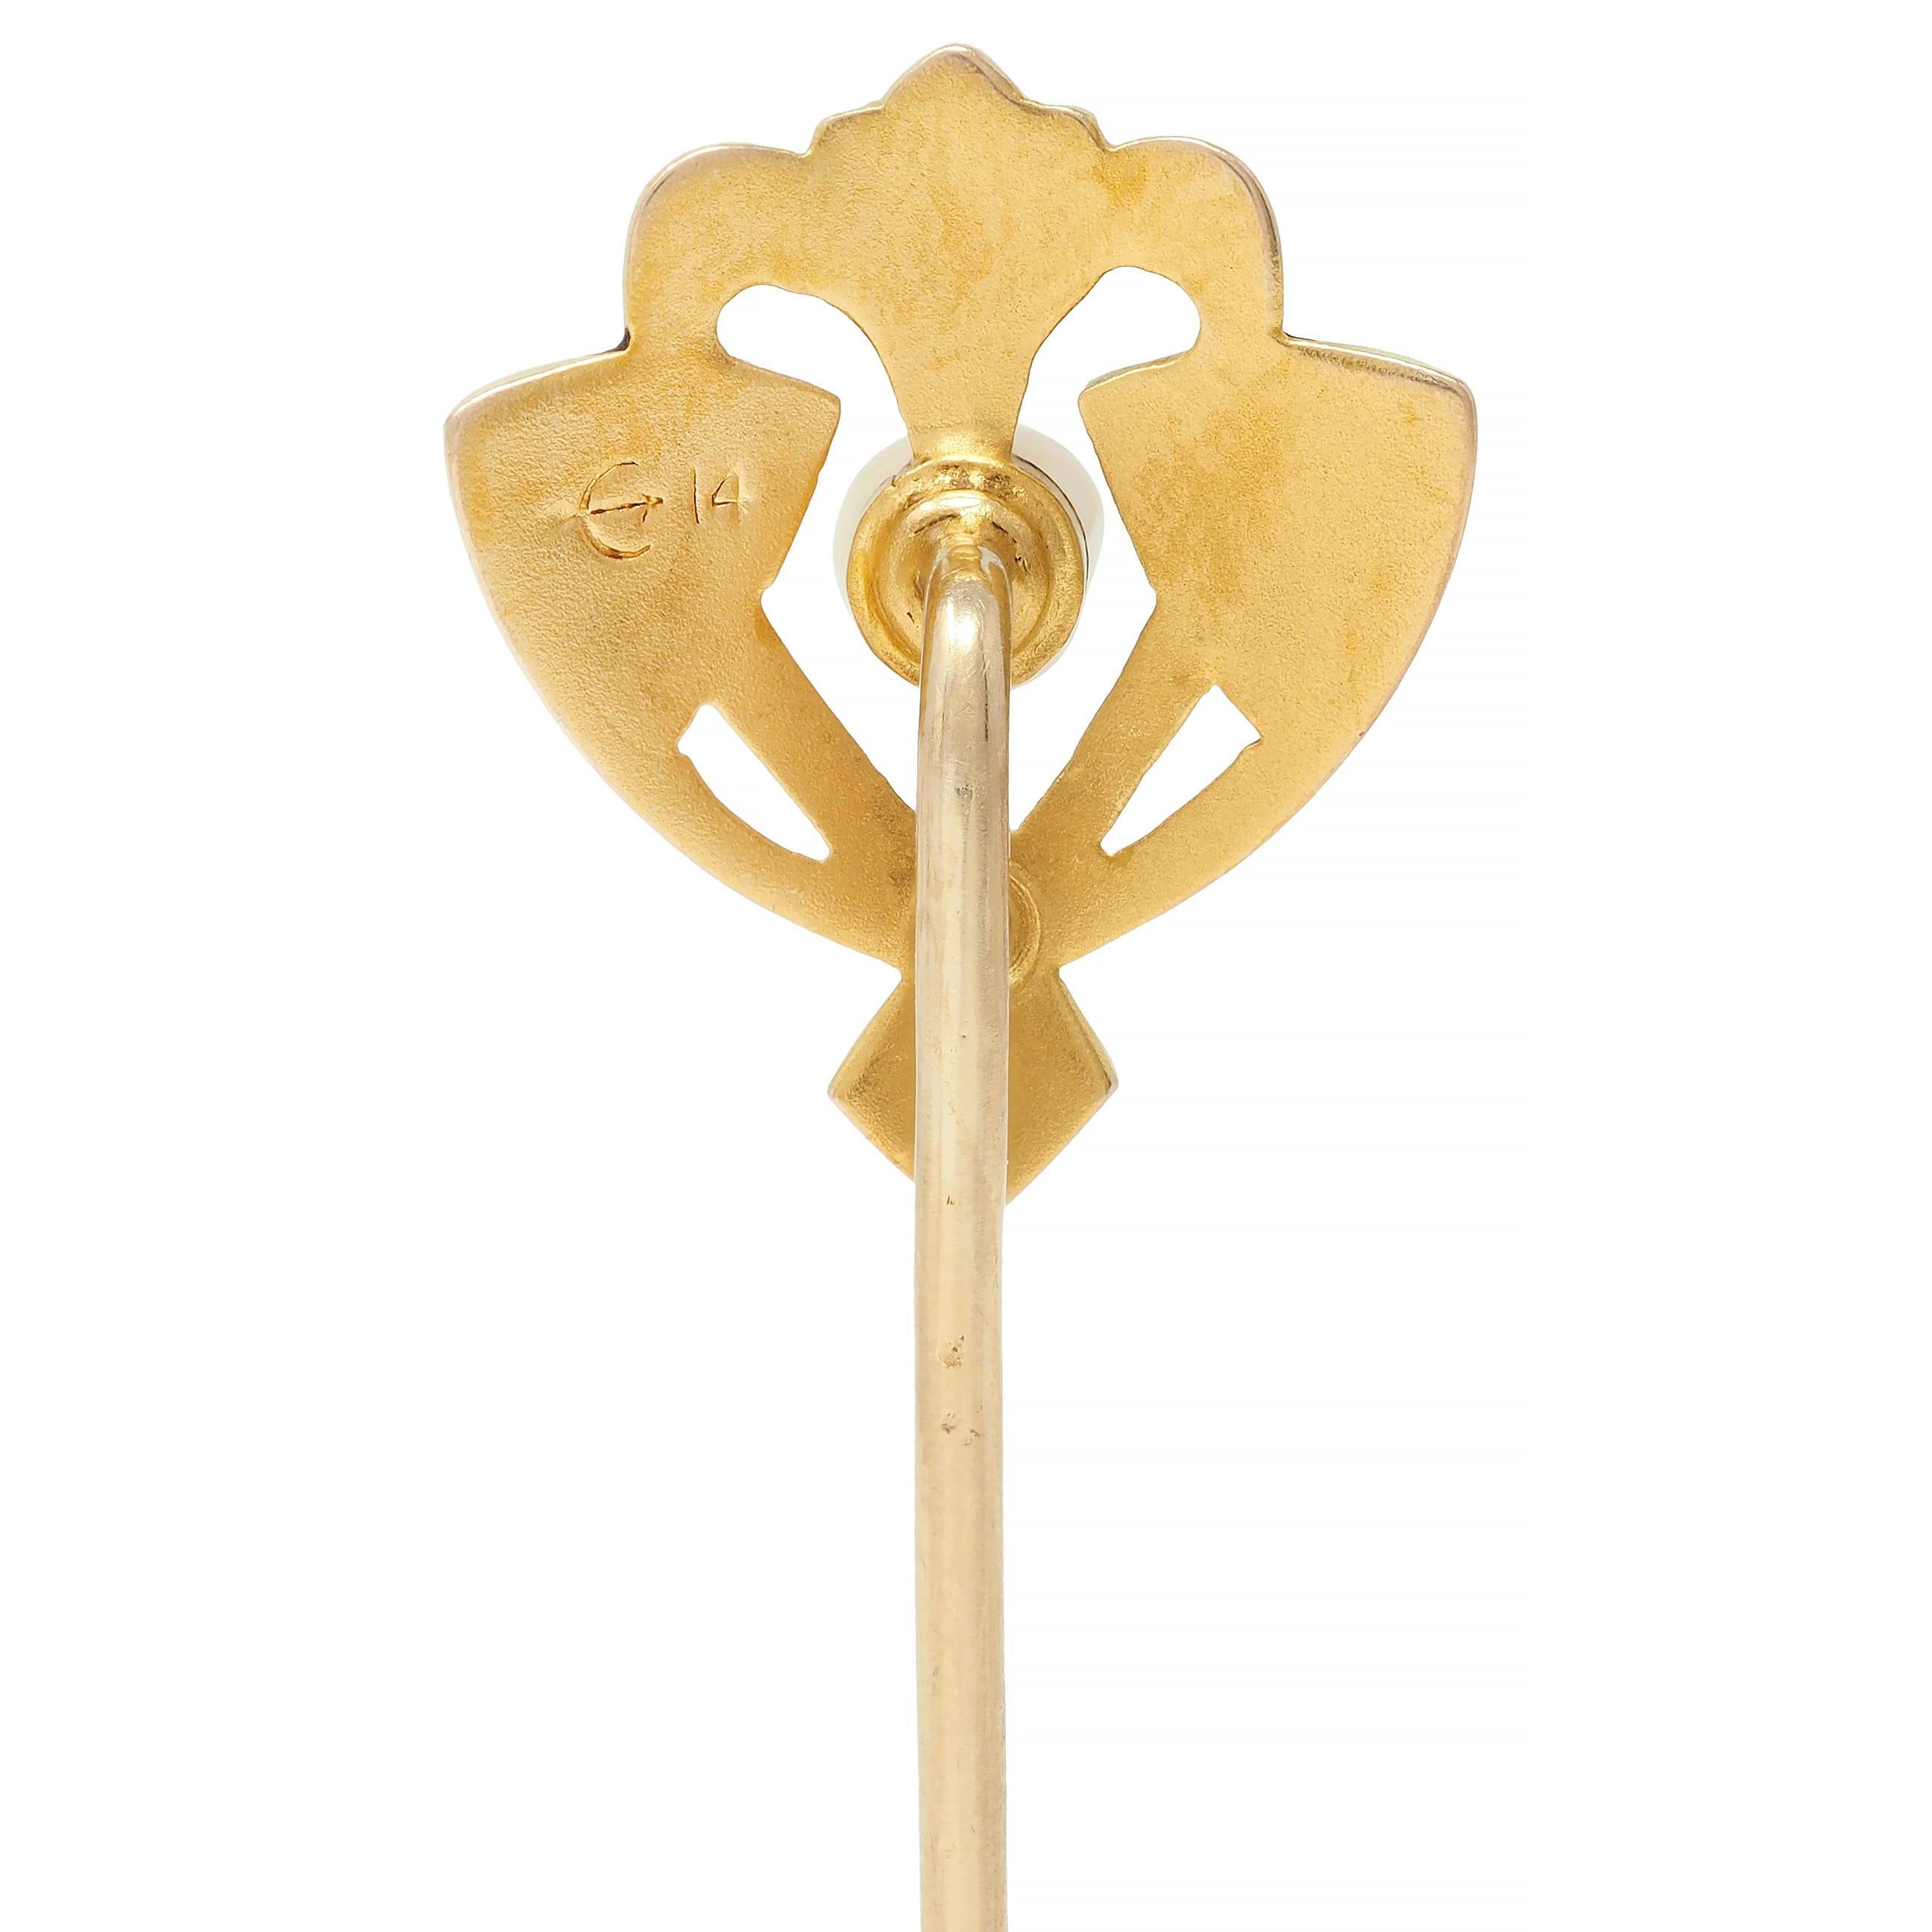 Henry Blank & Co. Art Nouveau Pearl 14 Karat Yellow Gold Antique Shield Stickpin In Excellent Condition For Sale In Philadelphia, PA